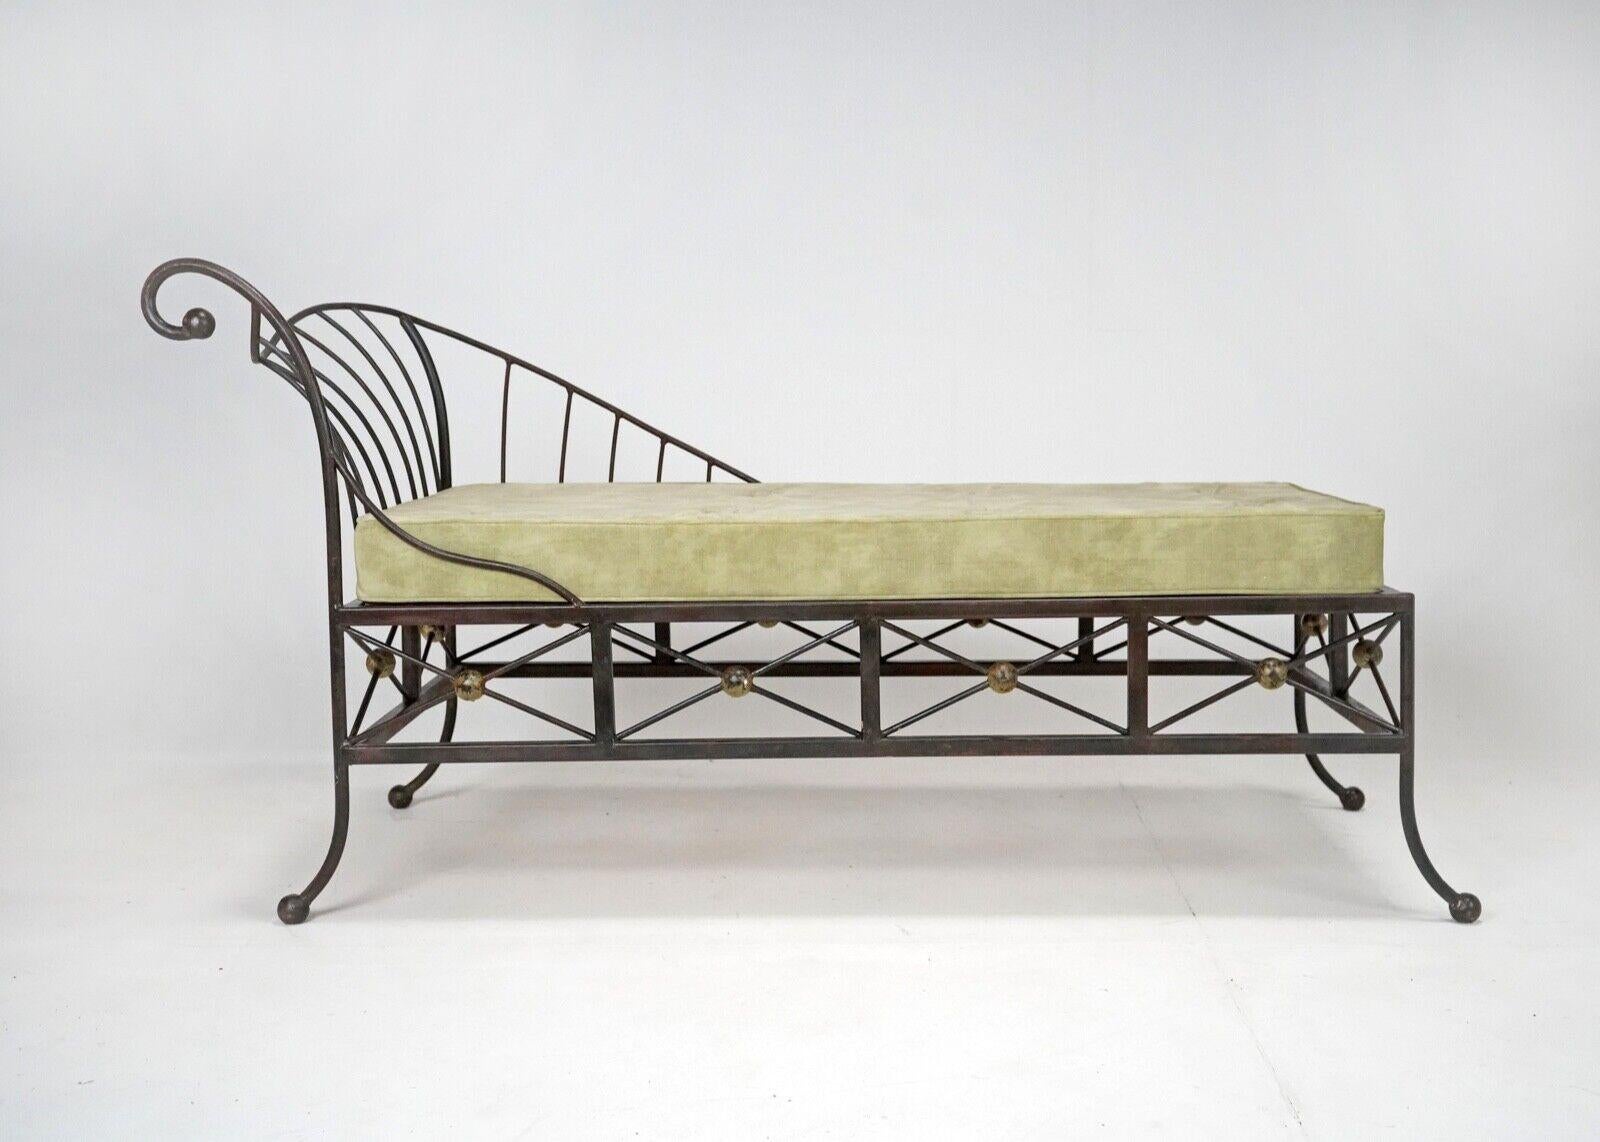 Vintage French Box Steel Metal Day Bed, Sun Lounger, Chaise Lounge Green Seat 3